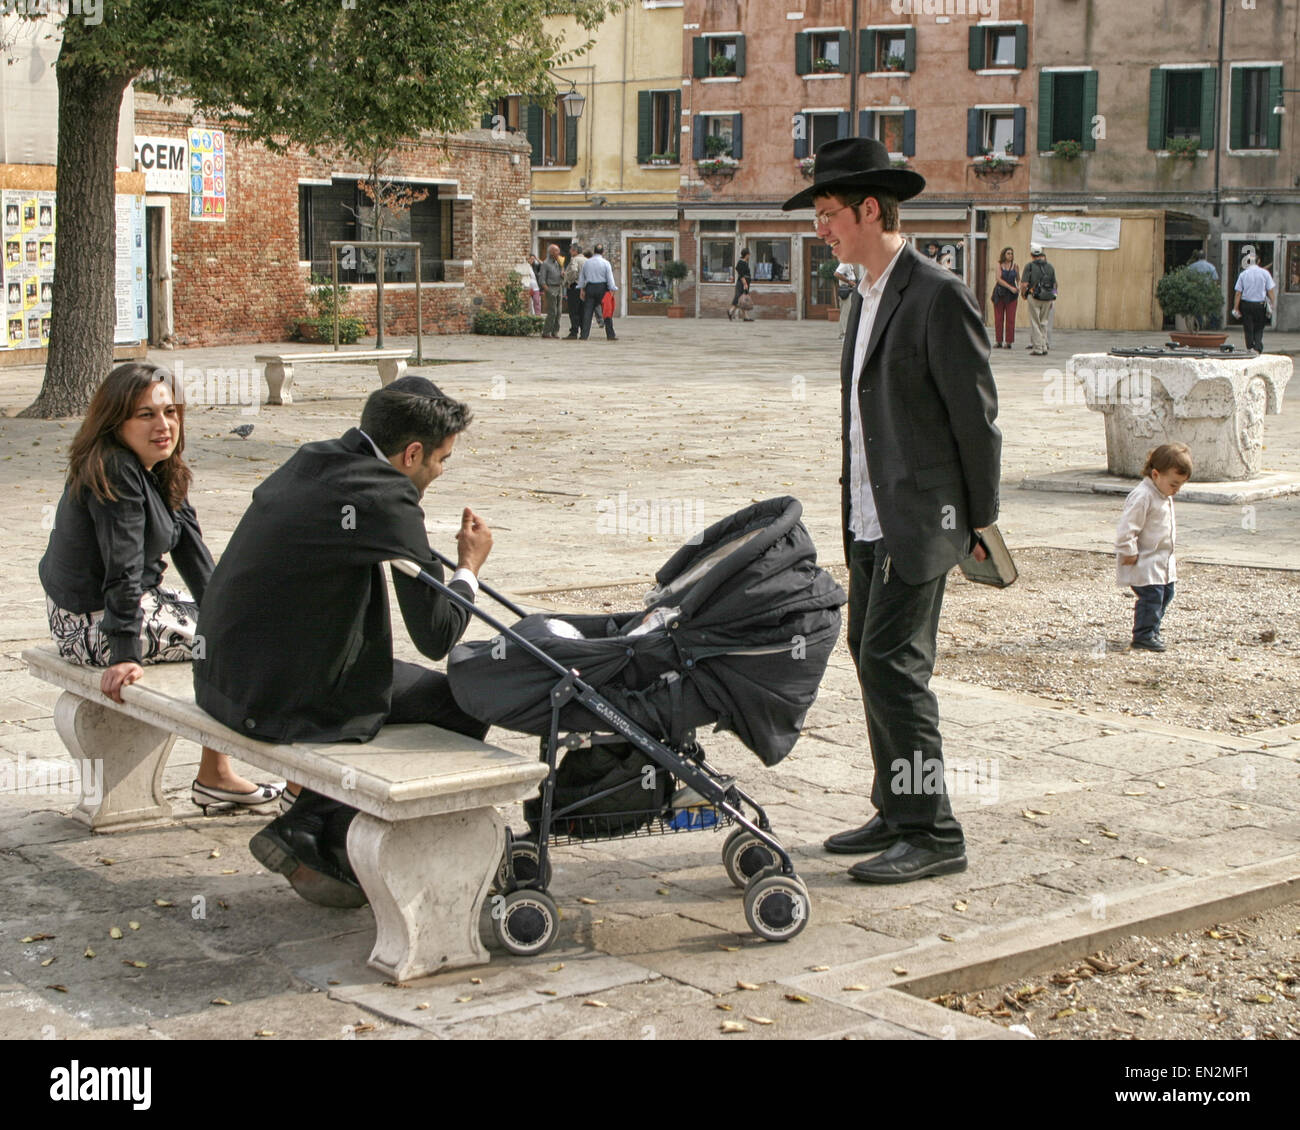 Venice, Province of Venice, ITALY. 7th Oct, 2004. In the Campo del Nuovo Ghetto, the main square of the present-day Venetian Ghetto, a group of Orthodox Jewish inhabitants gather around a bench--a young couple with a baby stroller, a young man, and a small child. Venice, a UNESCO World Heritage Site, is one of the most popular international tourist destinations. © Arnold Drapkin/ZUMA Wire/Alamy Live News Stock Photo